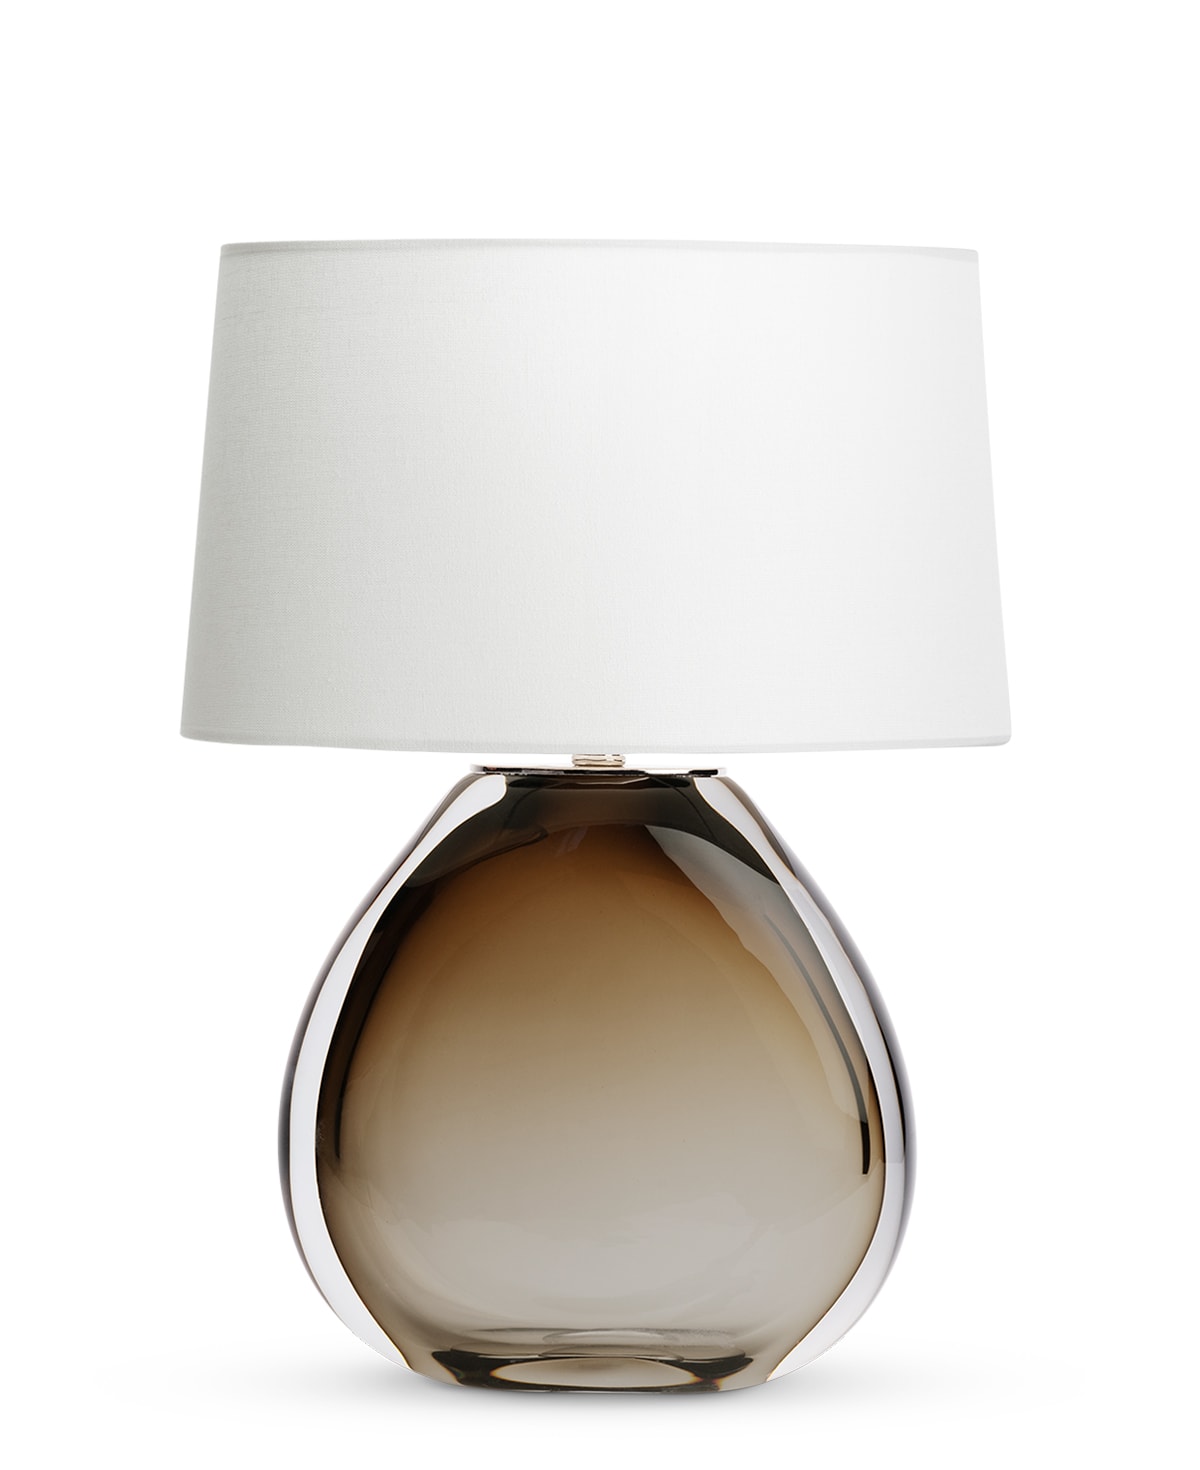 FlowDecor Oriole Table Lamp in glass with beige and off-white linen oval shade (# 4618)